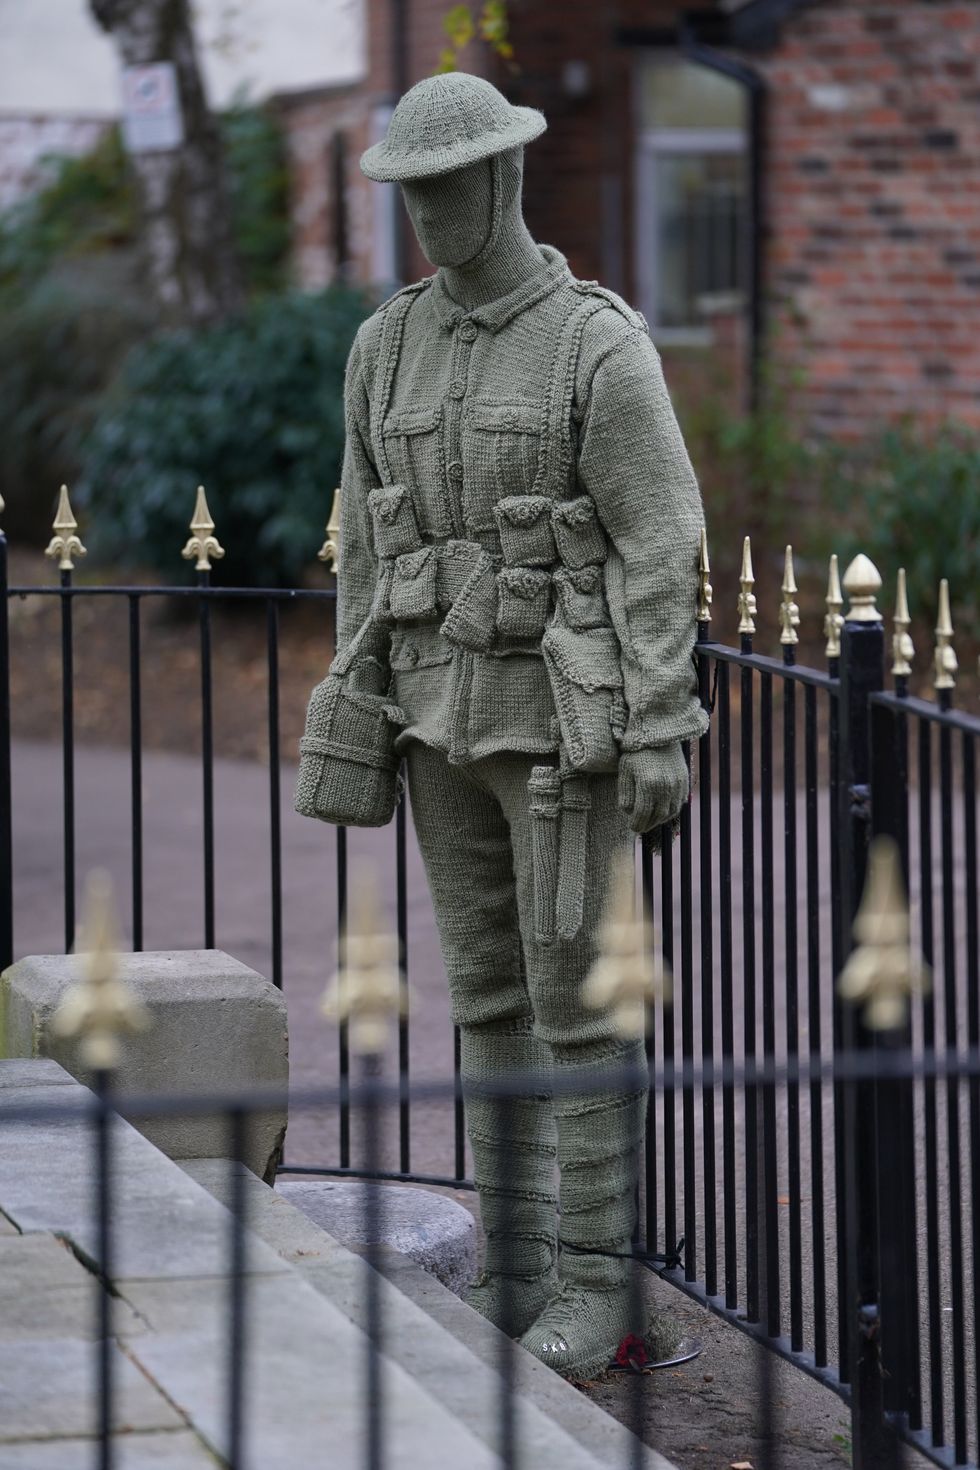 The knitted soldier has been placed next to the War Memorial Clock Tower in Syston, Leicestershire (Mike Egerton/PA)